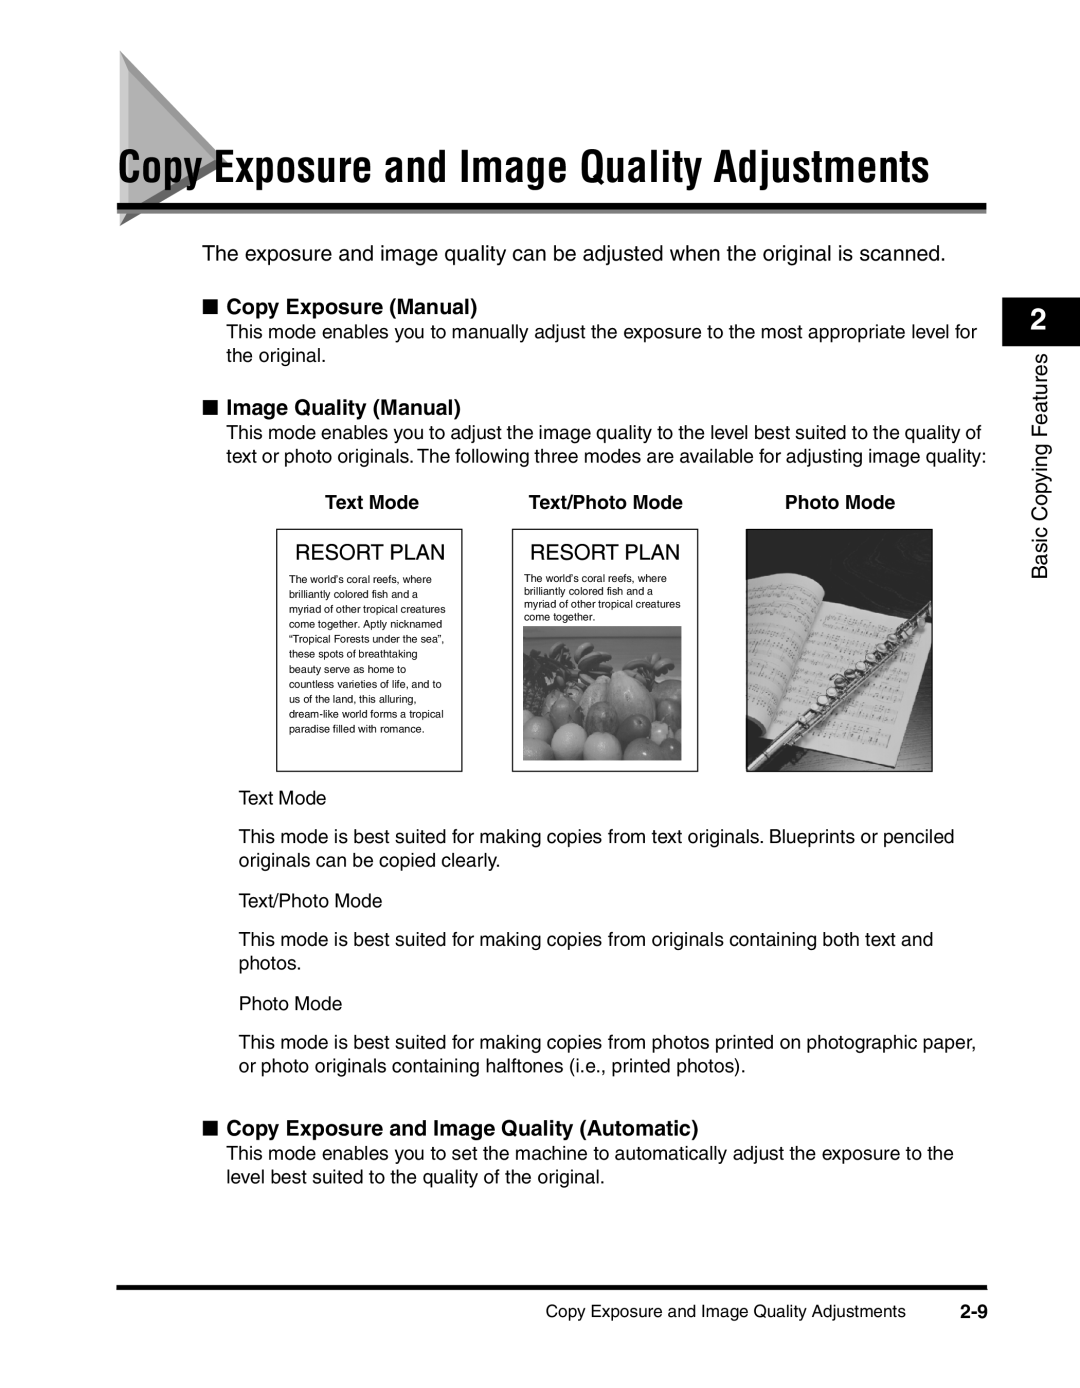 Canon 2300 Copy Exposure and Image Quality Adjustments, Copy Exposure Manual, Image Quality Manual, Basic Copying Features 